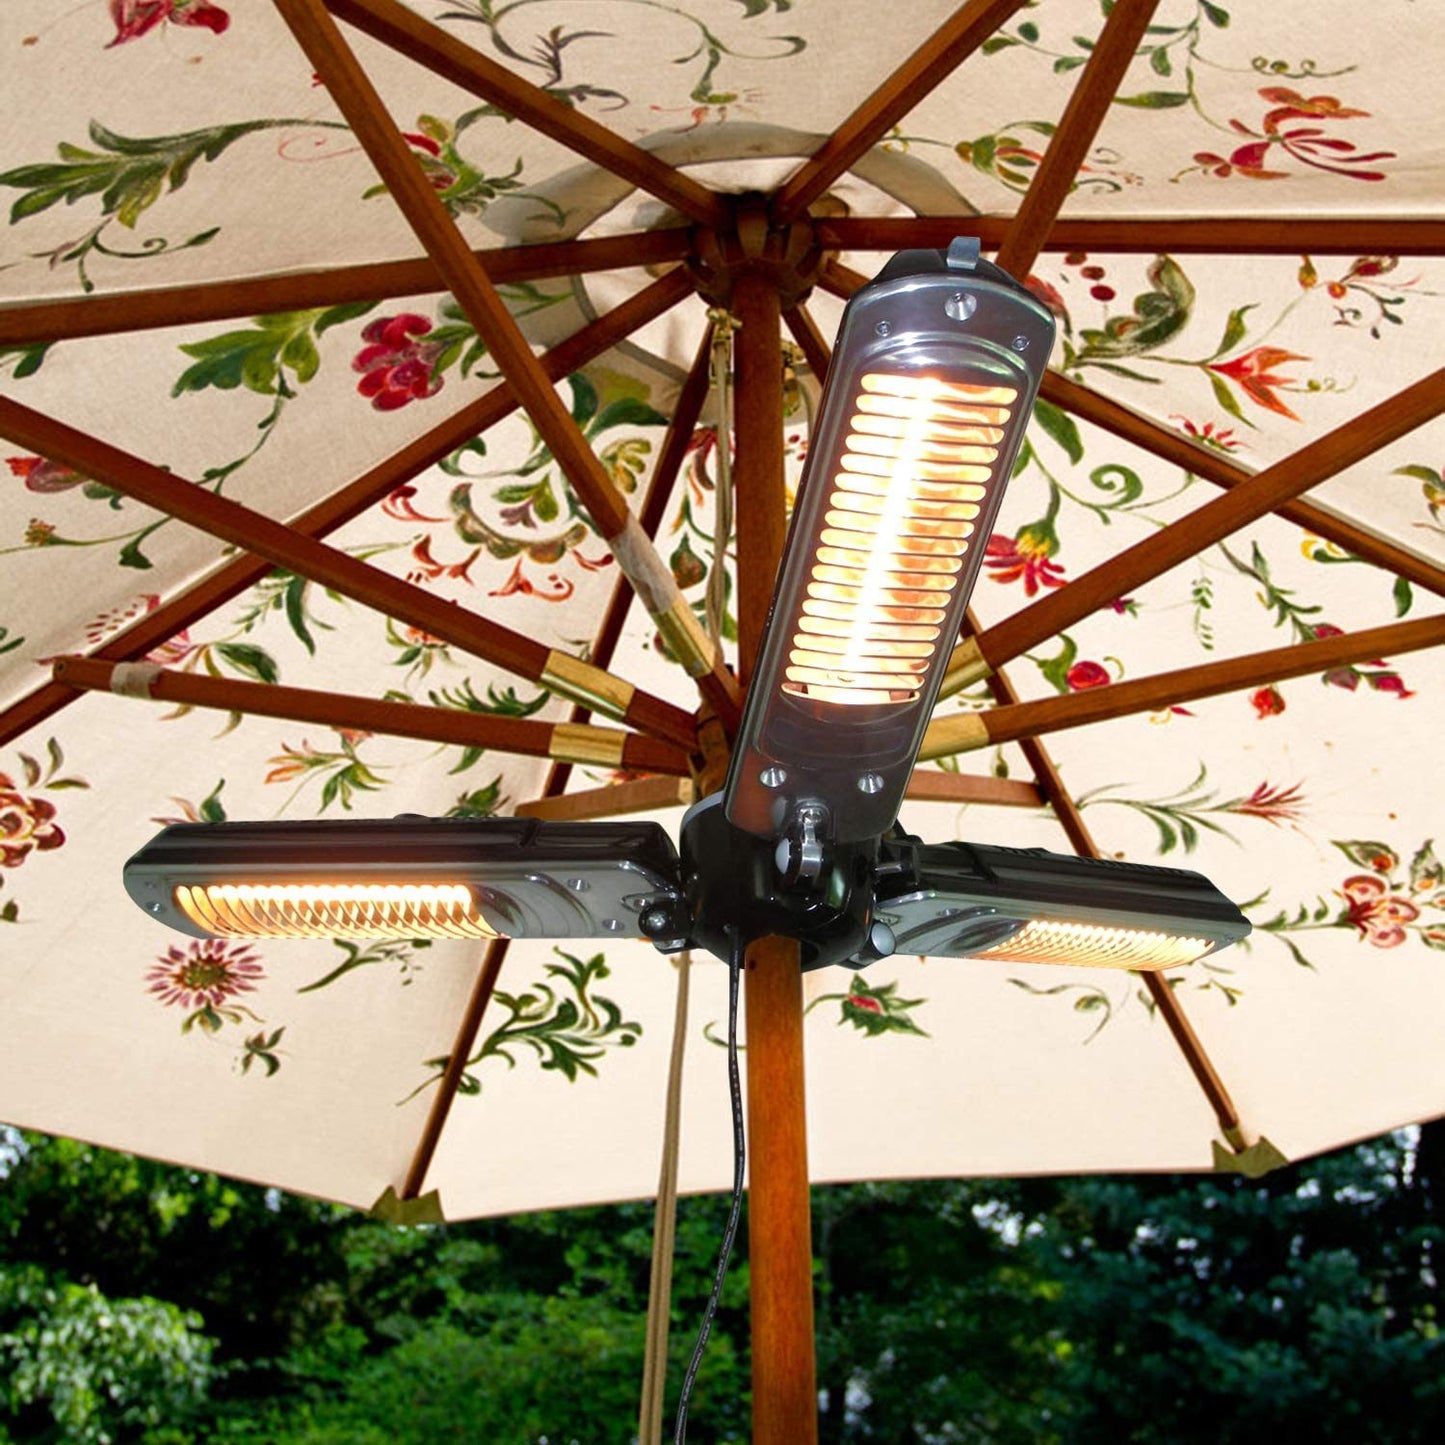 Foldable Electric Patio umbrella Heater with 3 Heating Panels